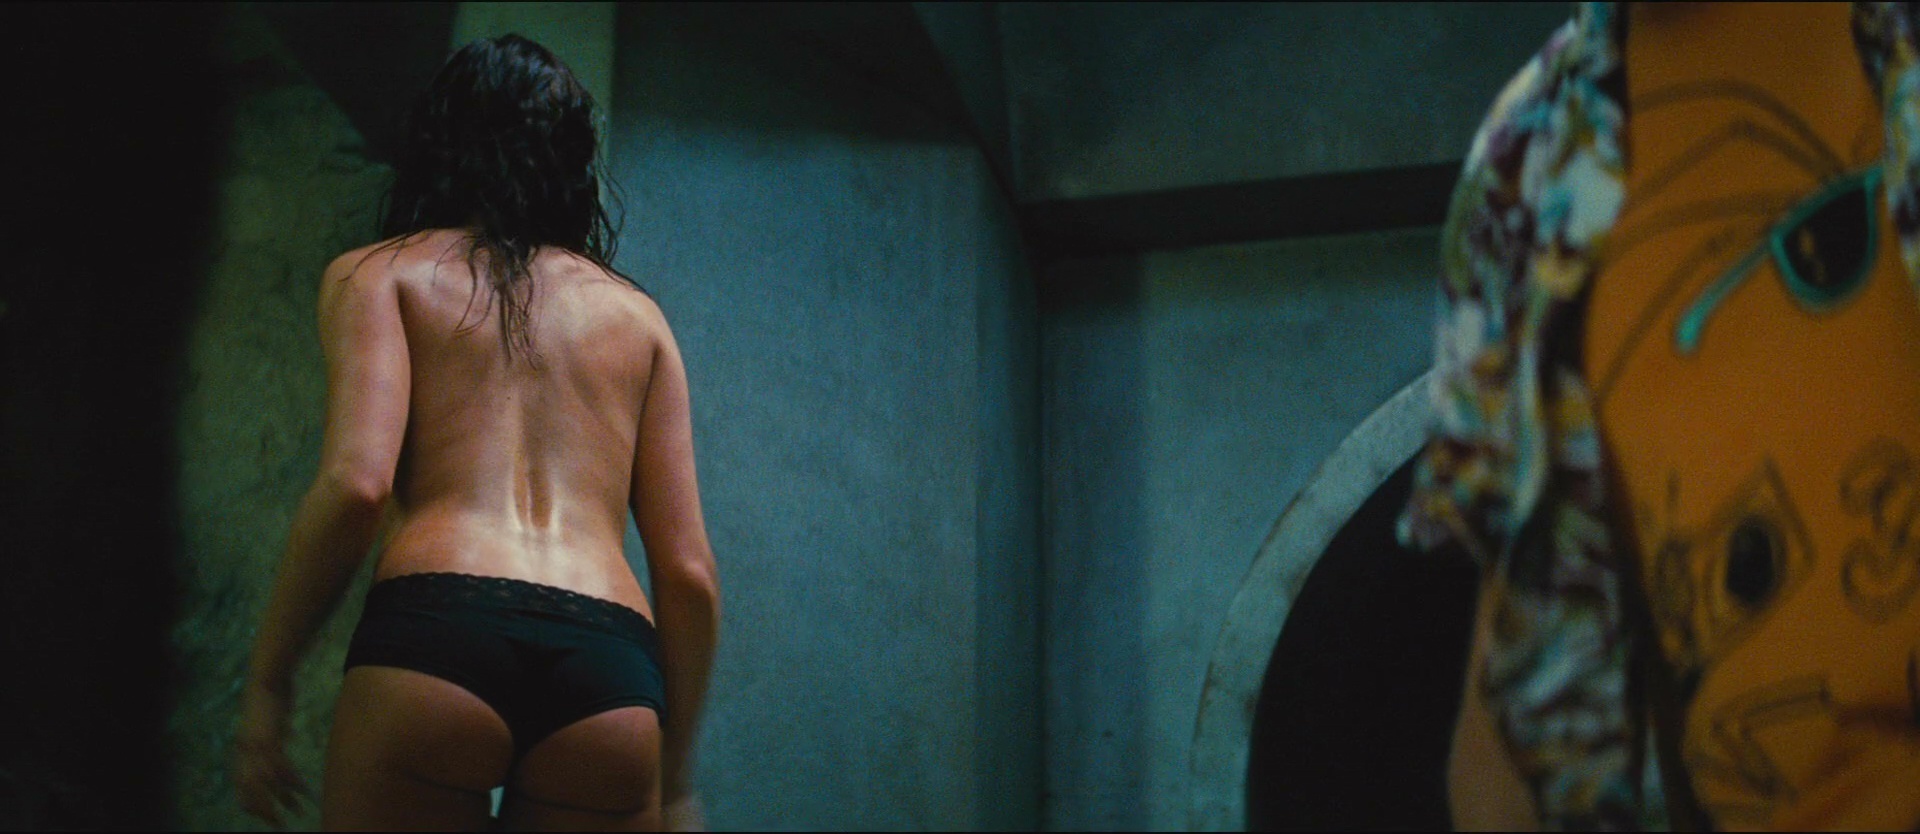 Mission: Impossible - Rogue Nation nude pics.